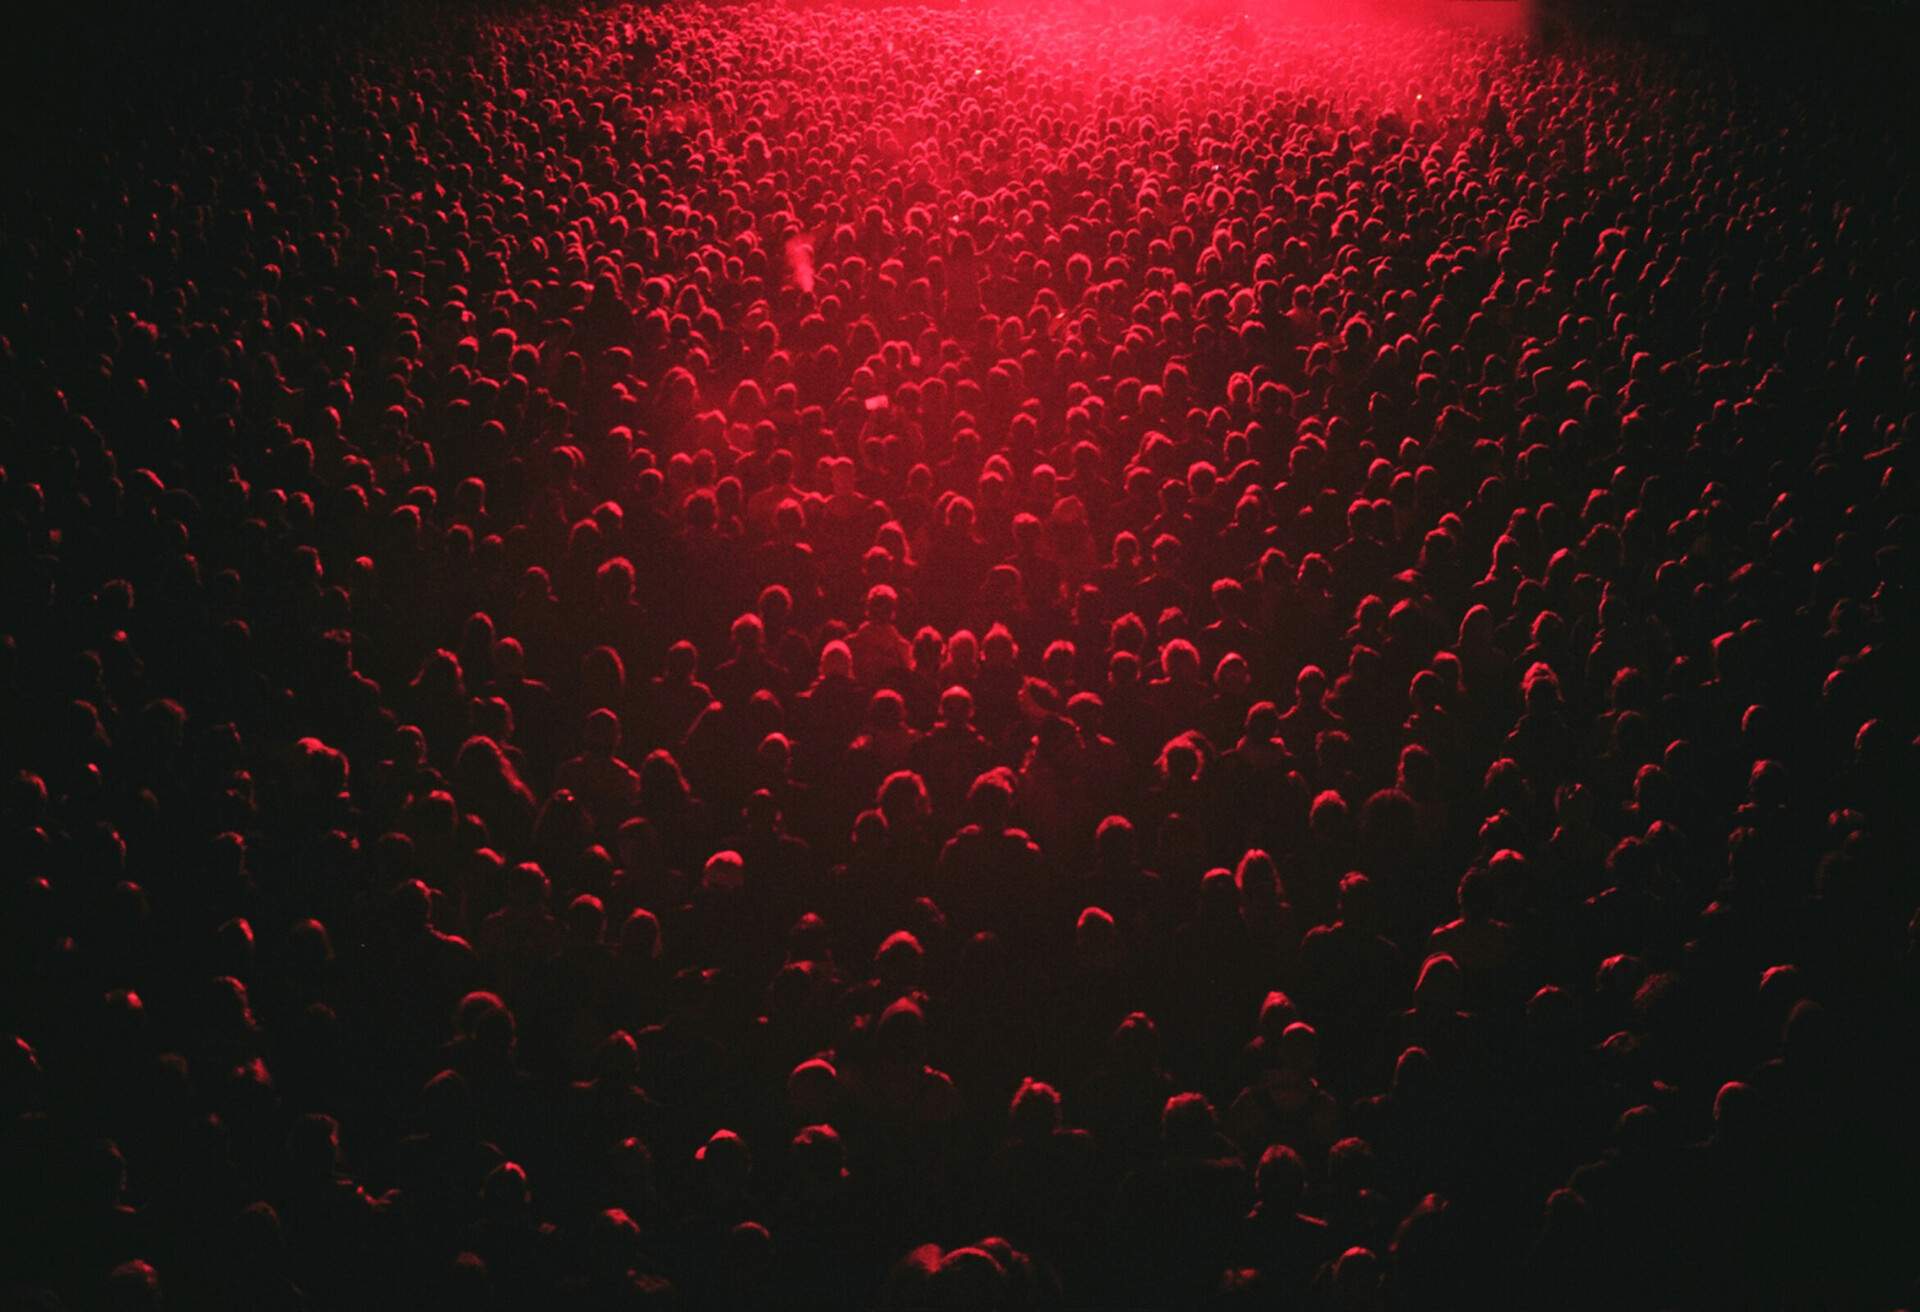 A large crowd watching a live performance lit with the red stage lighting. La Route Du Rock 2015.